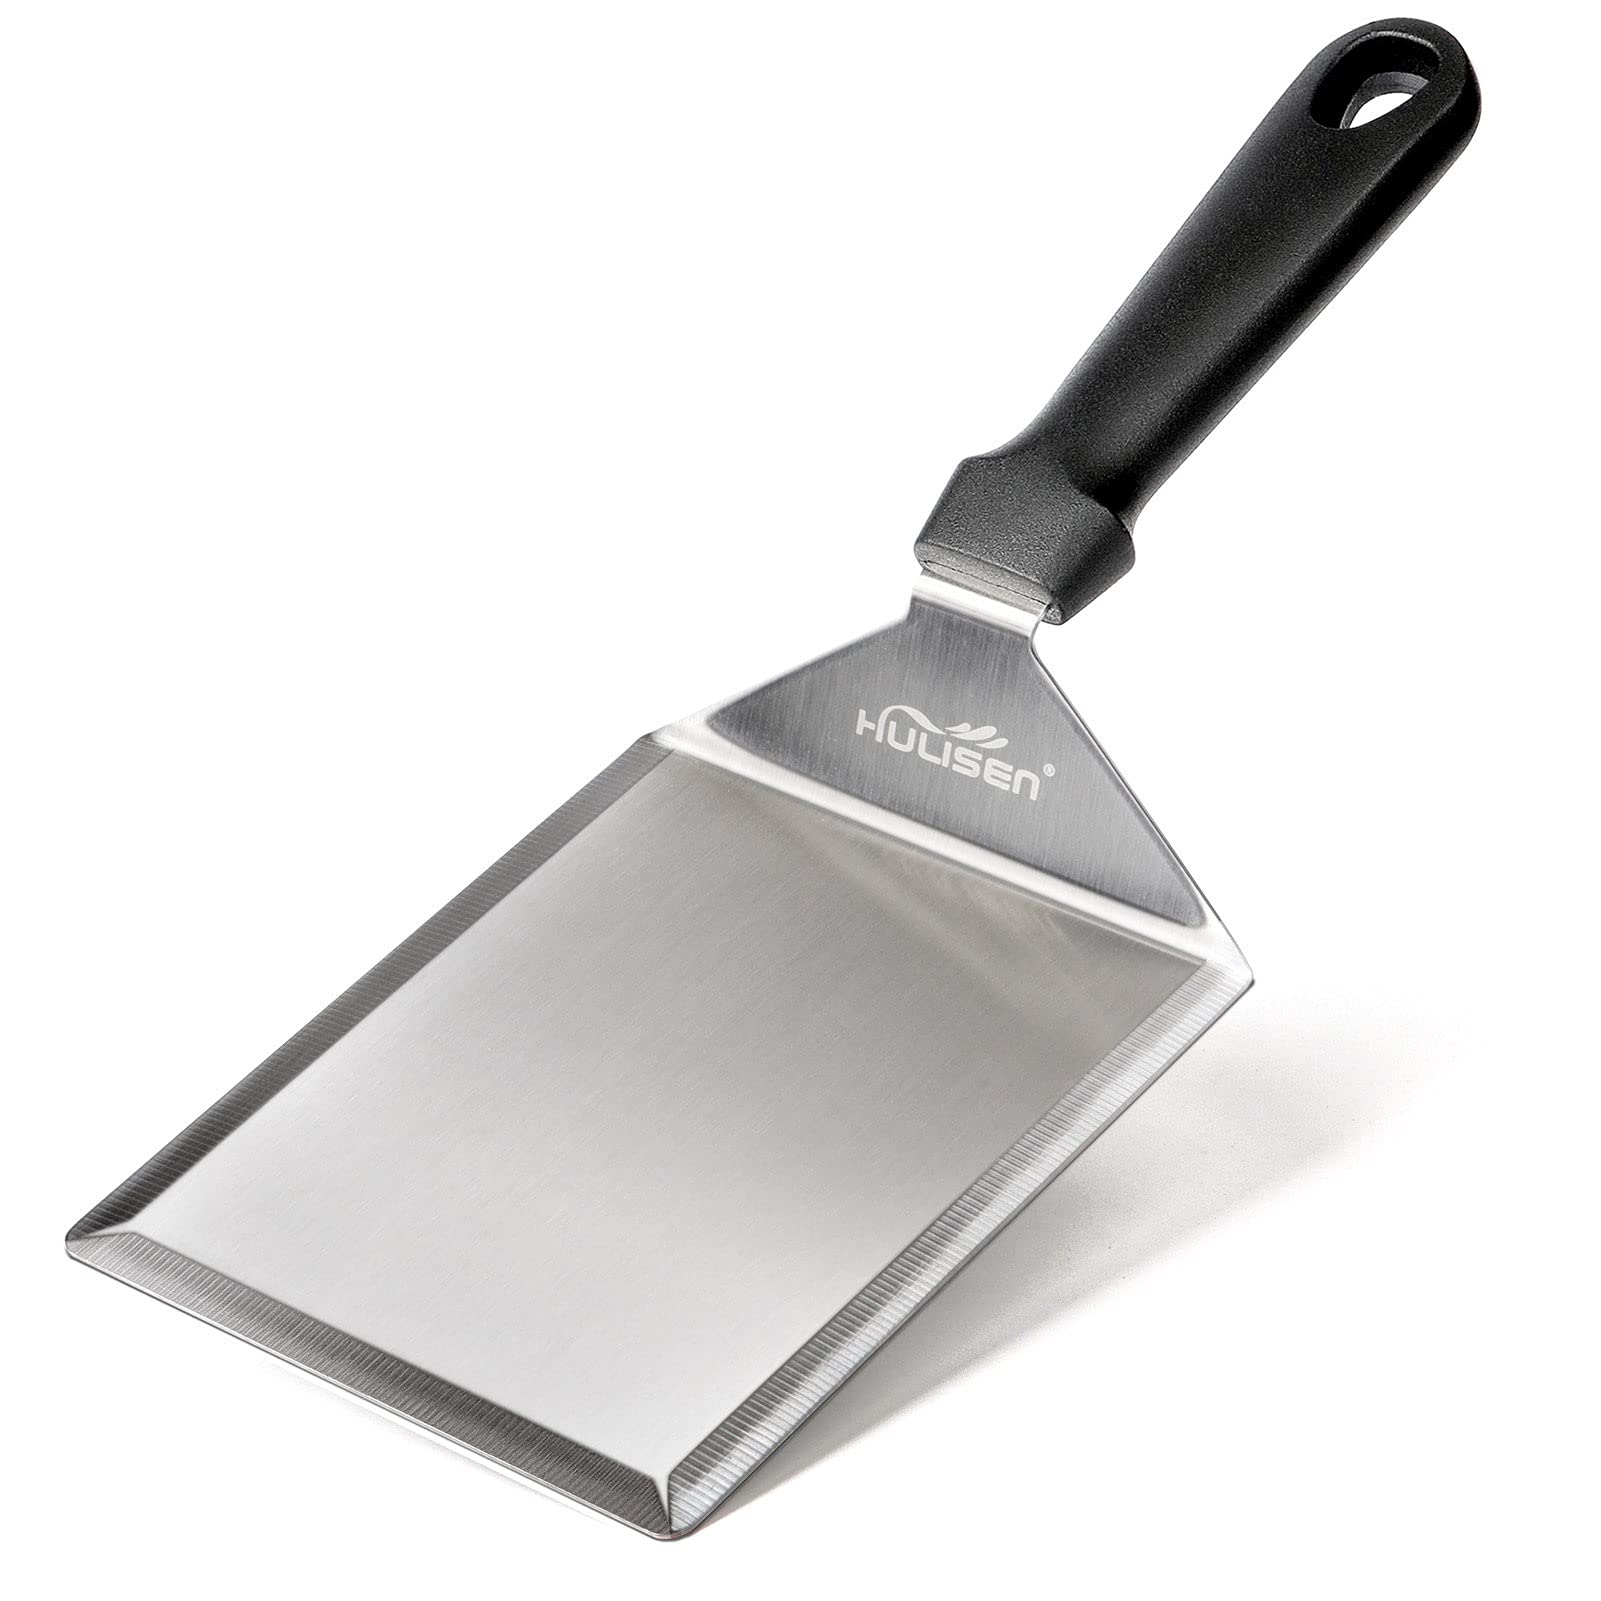 HULISEN Stainless Steel Large Grill Spatula